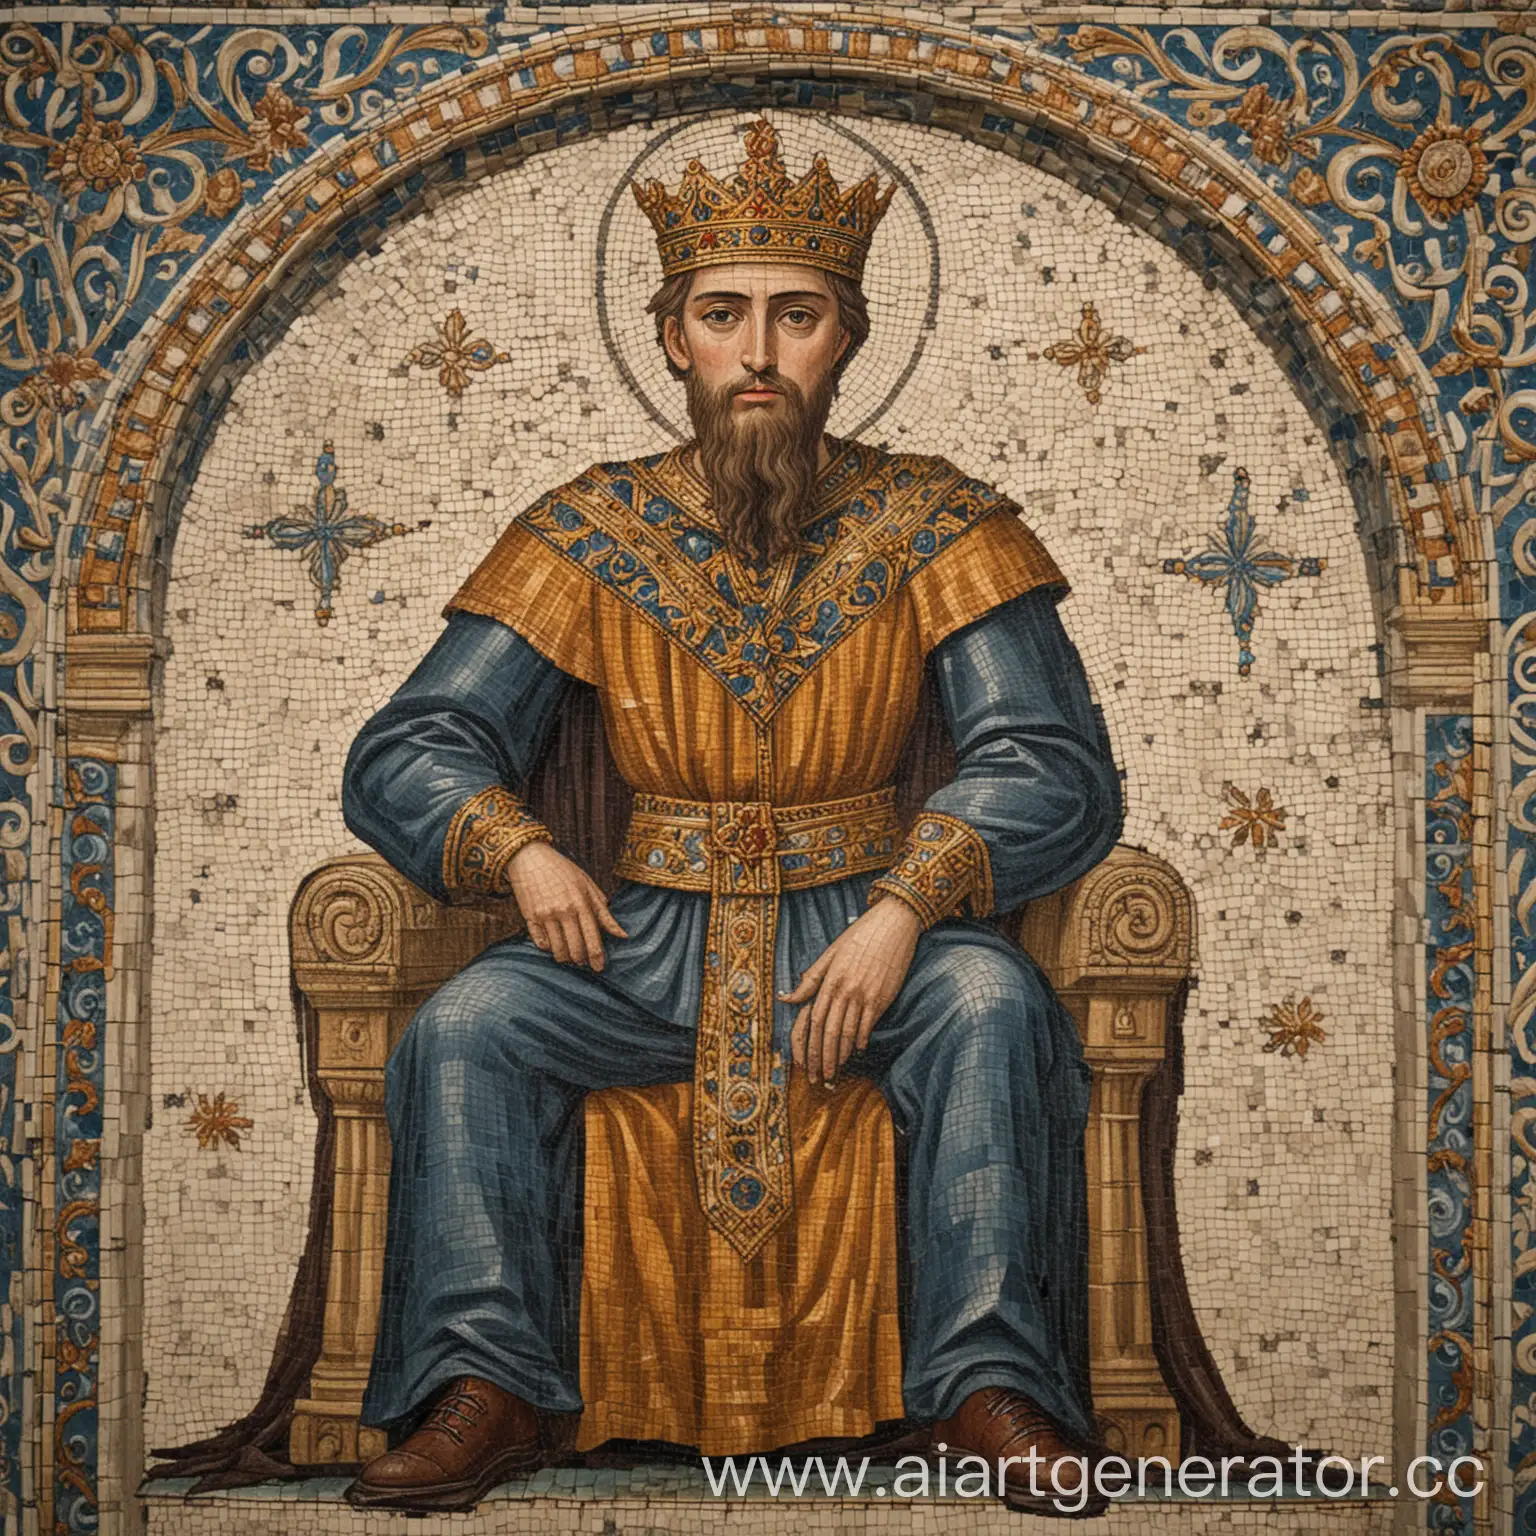 Medieval Orthodox Mosaic of a Young Crimean Gothic King on a throne